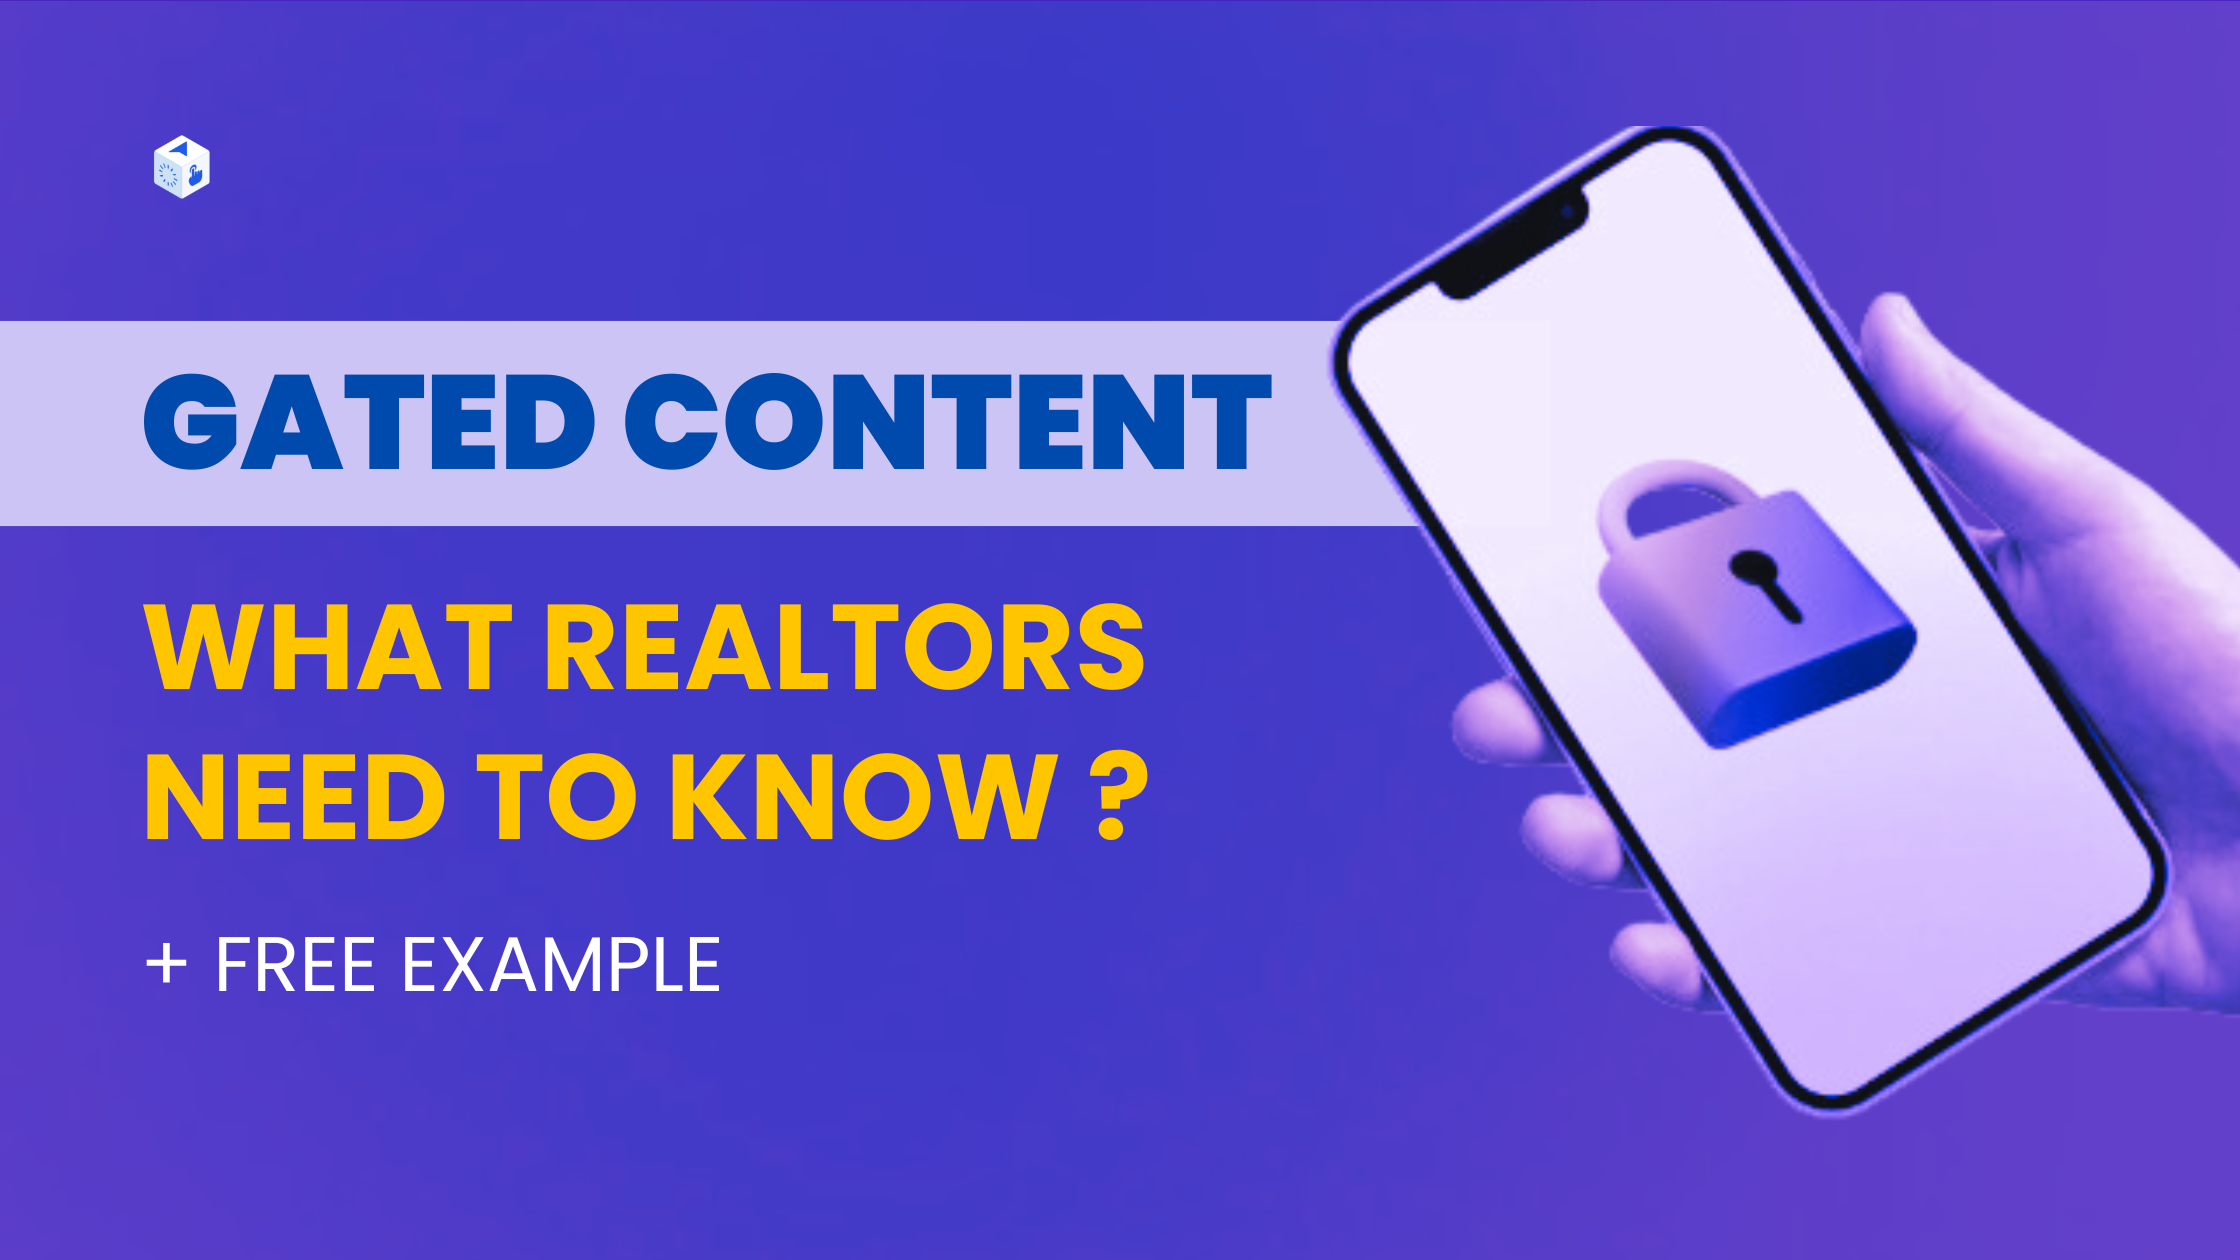 Gated content: What realtors need to know